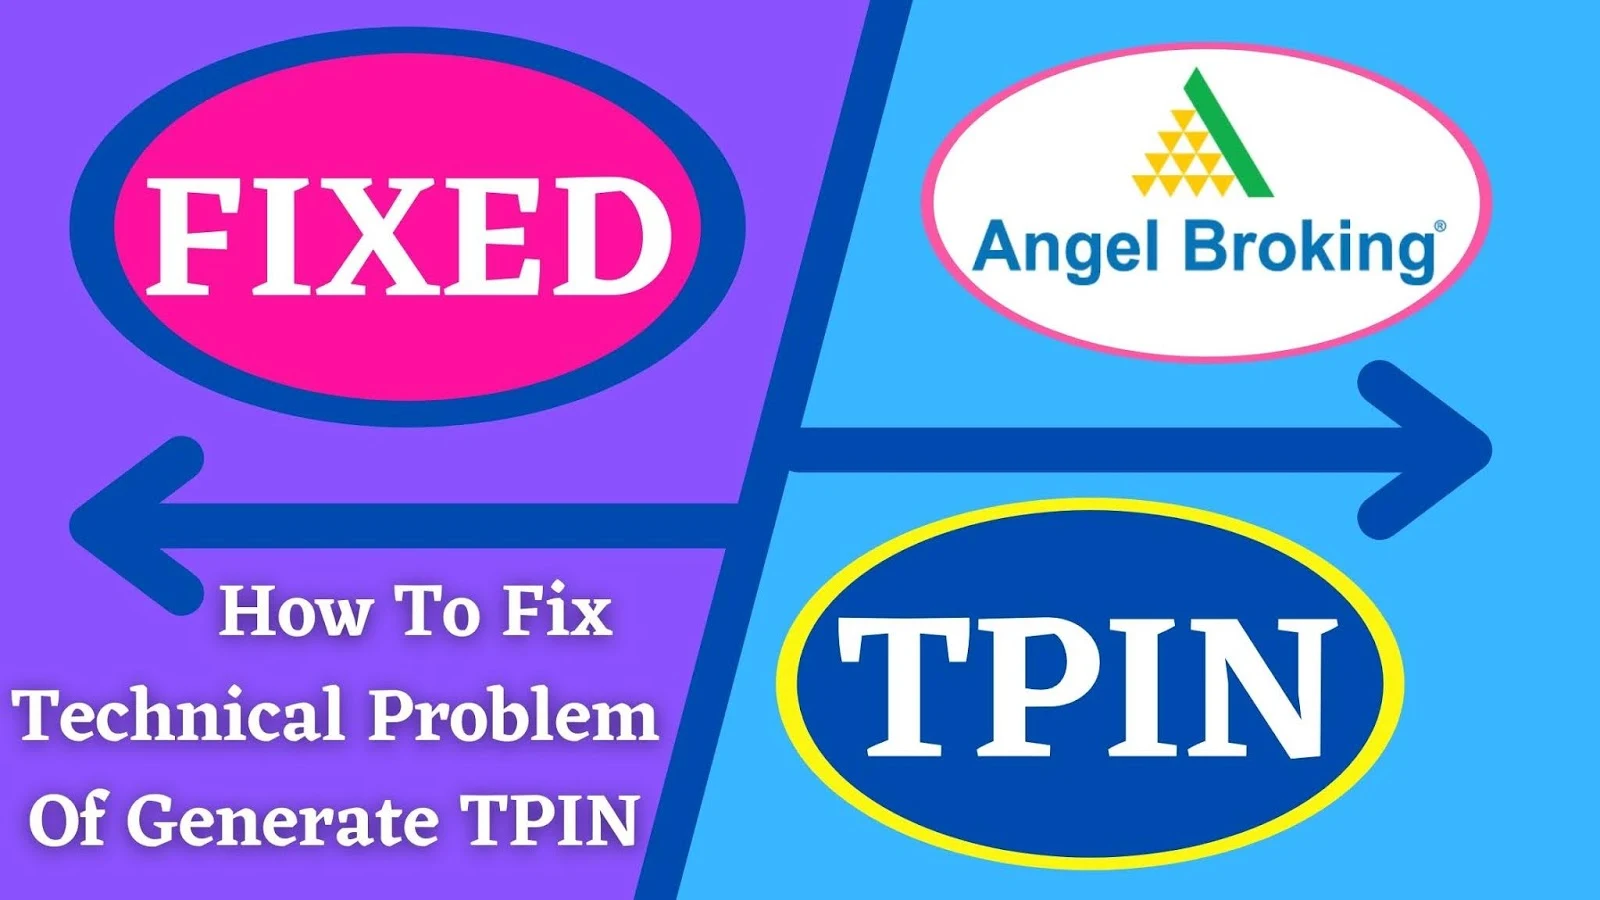 [Fixed] How To Fix Technical Problem Of Generate TPIN, When Sell The Holding Share In Angel Broking